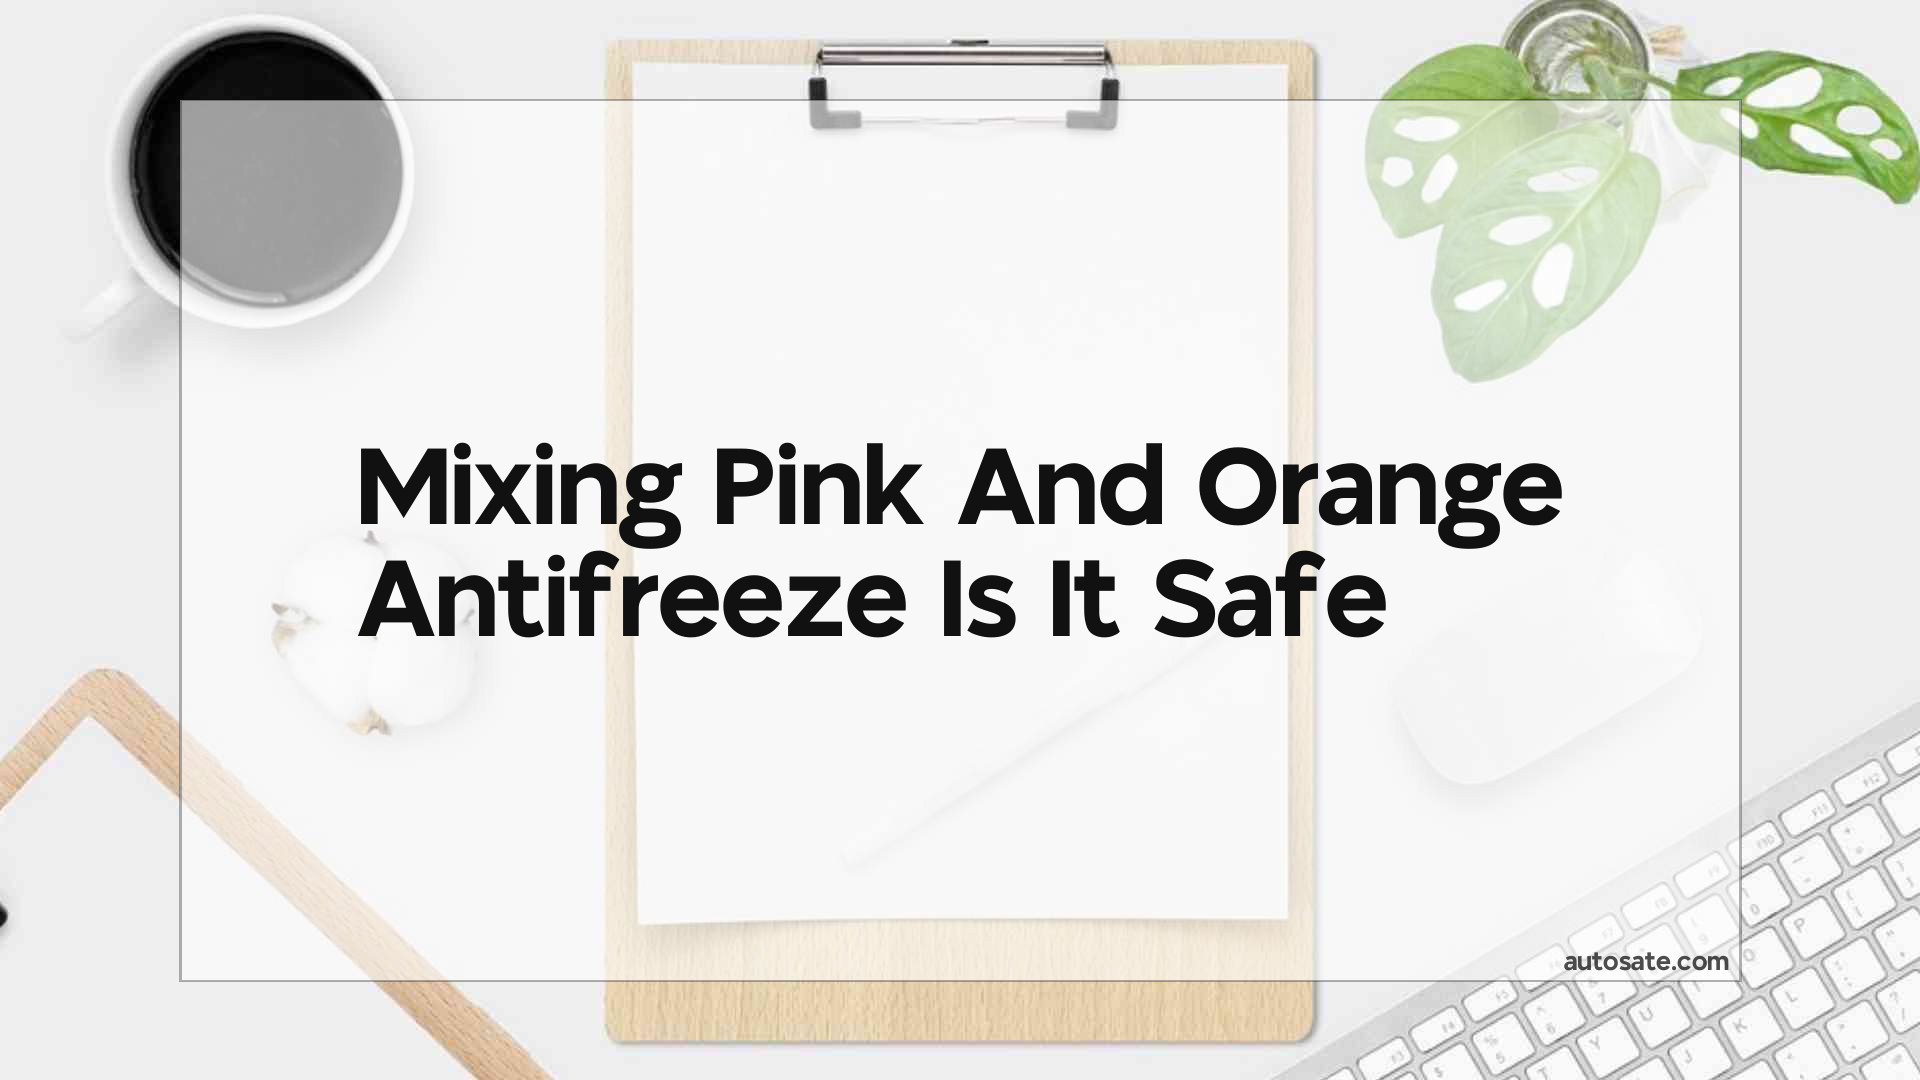 Mixing Pink And Orange Antifreeze Is It Safe